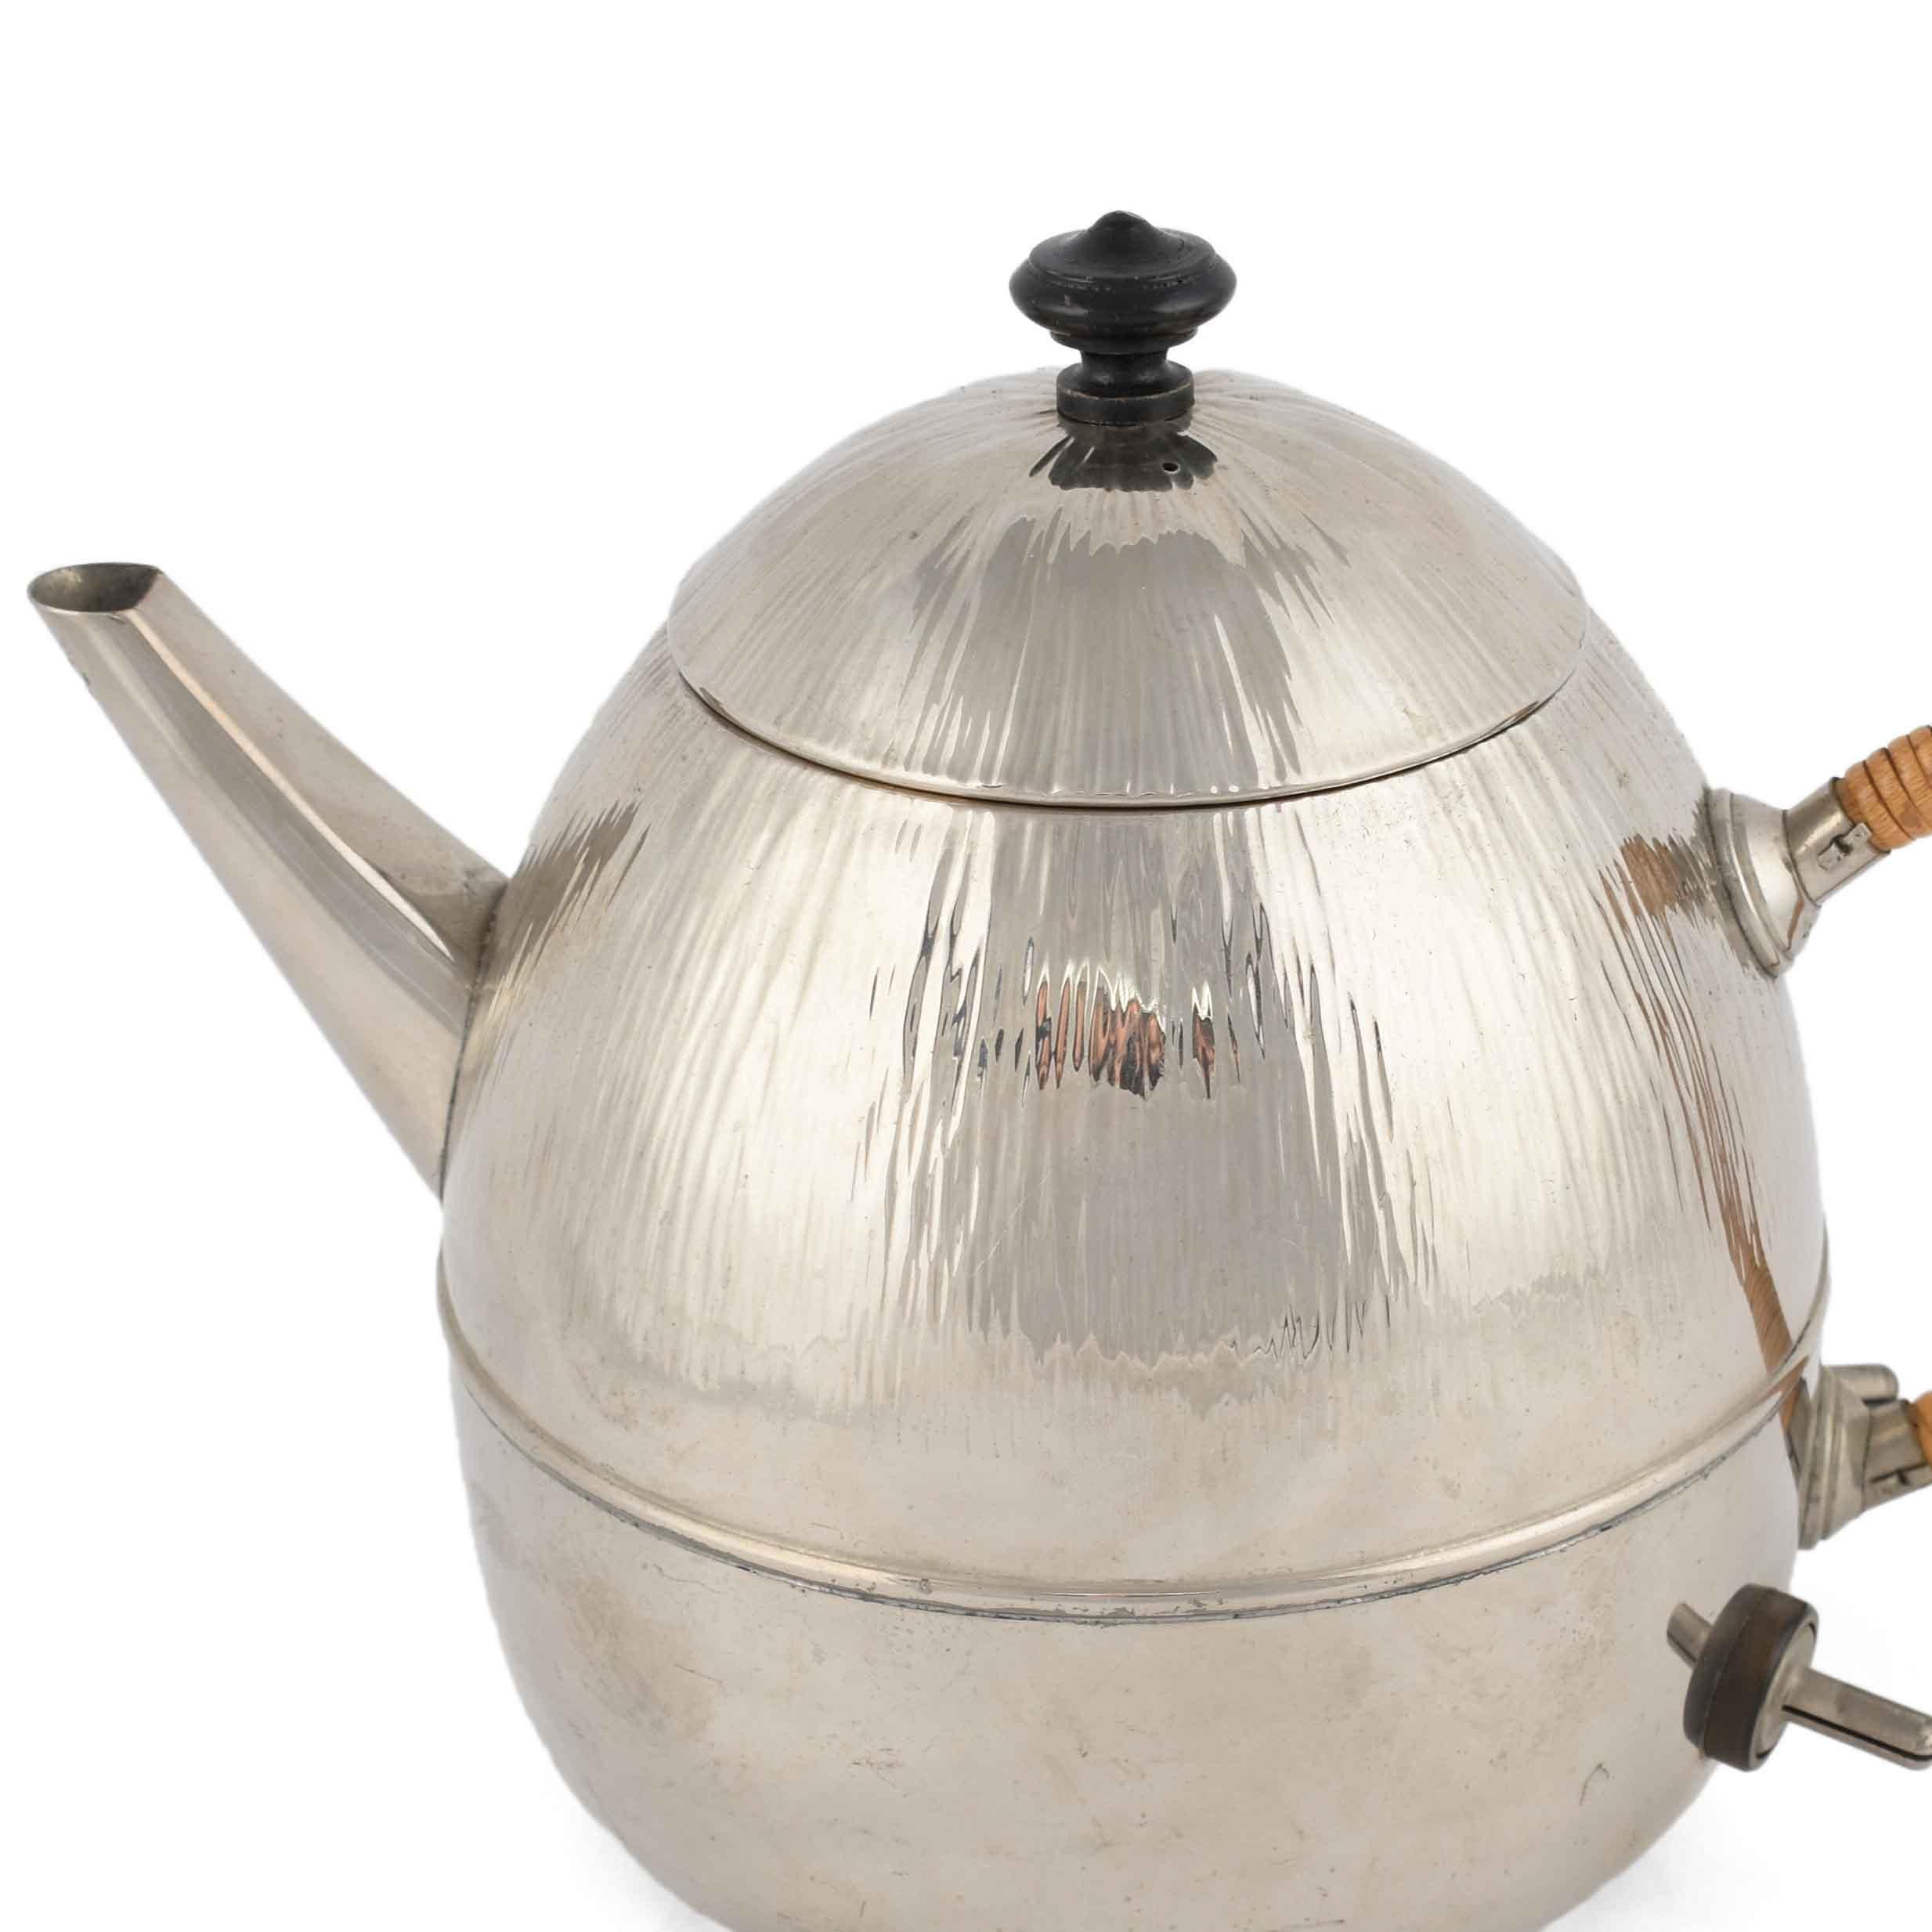 Electrical Kettle is an original work realized in the first half of the XX Century. 

Made in Germany.

Chromed metal. 

Very good conditions. 

Original manufacture realized in the 1930s in chromed metal. The work presents an ovoid body